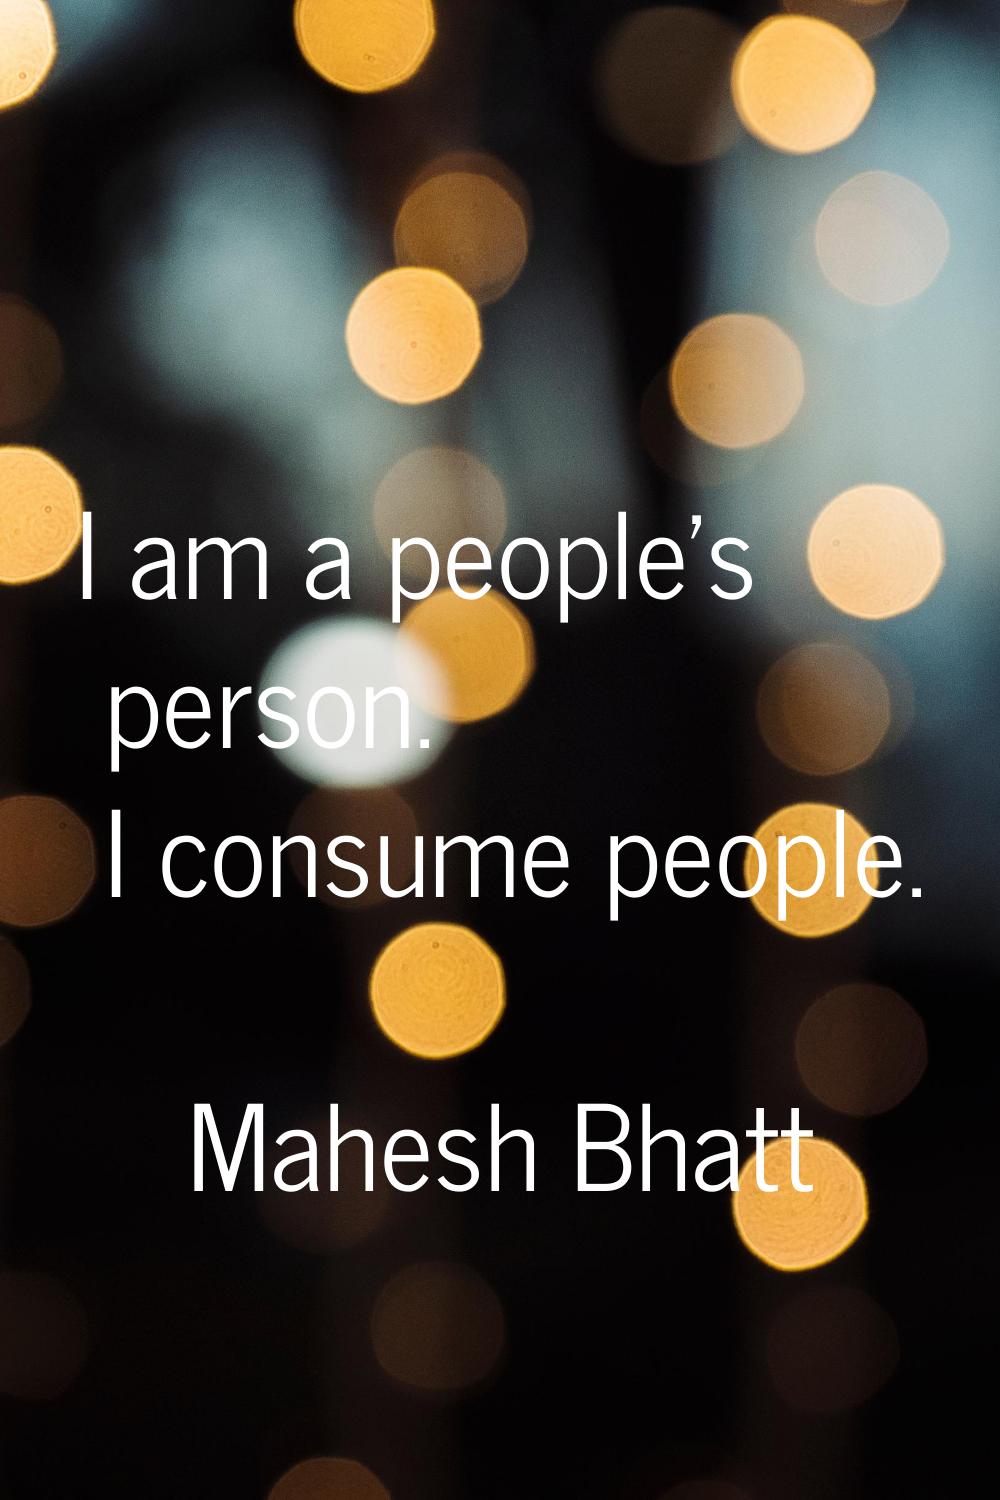 I am a people's person. I consume people.